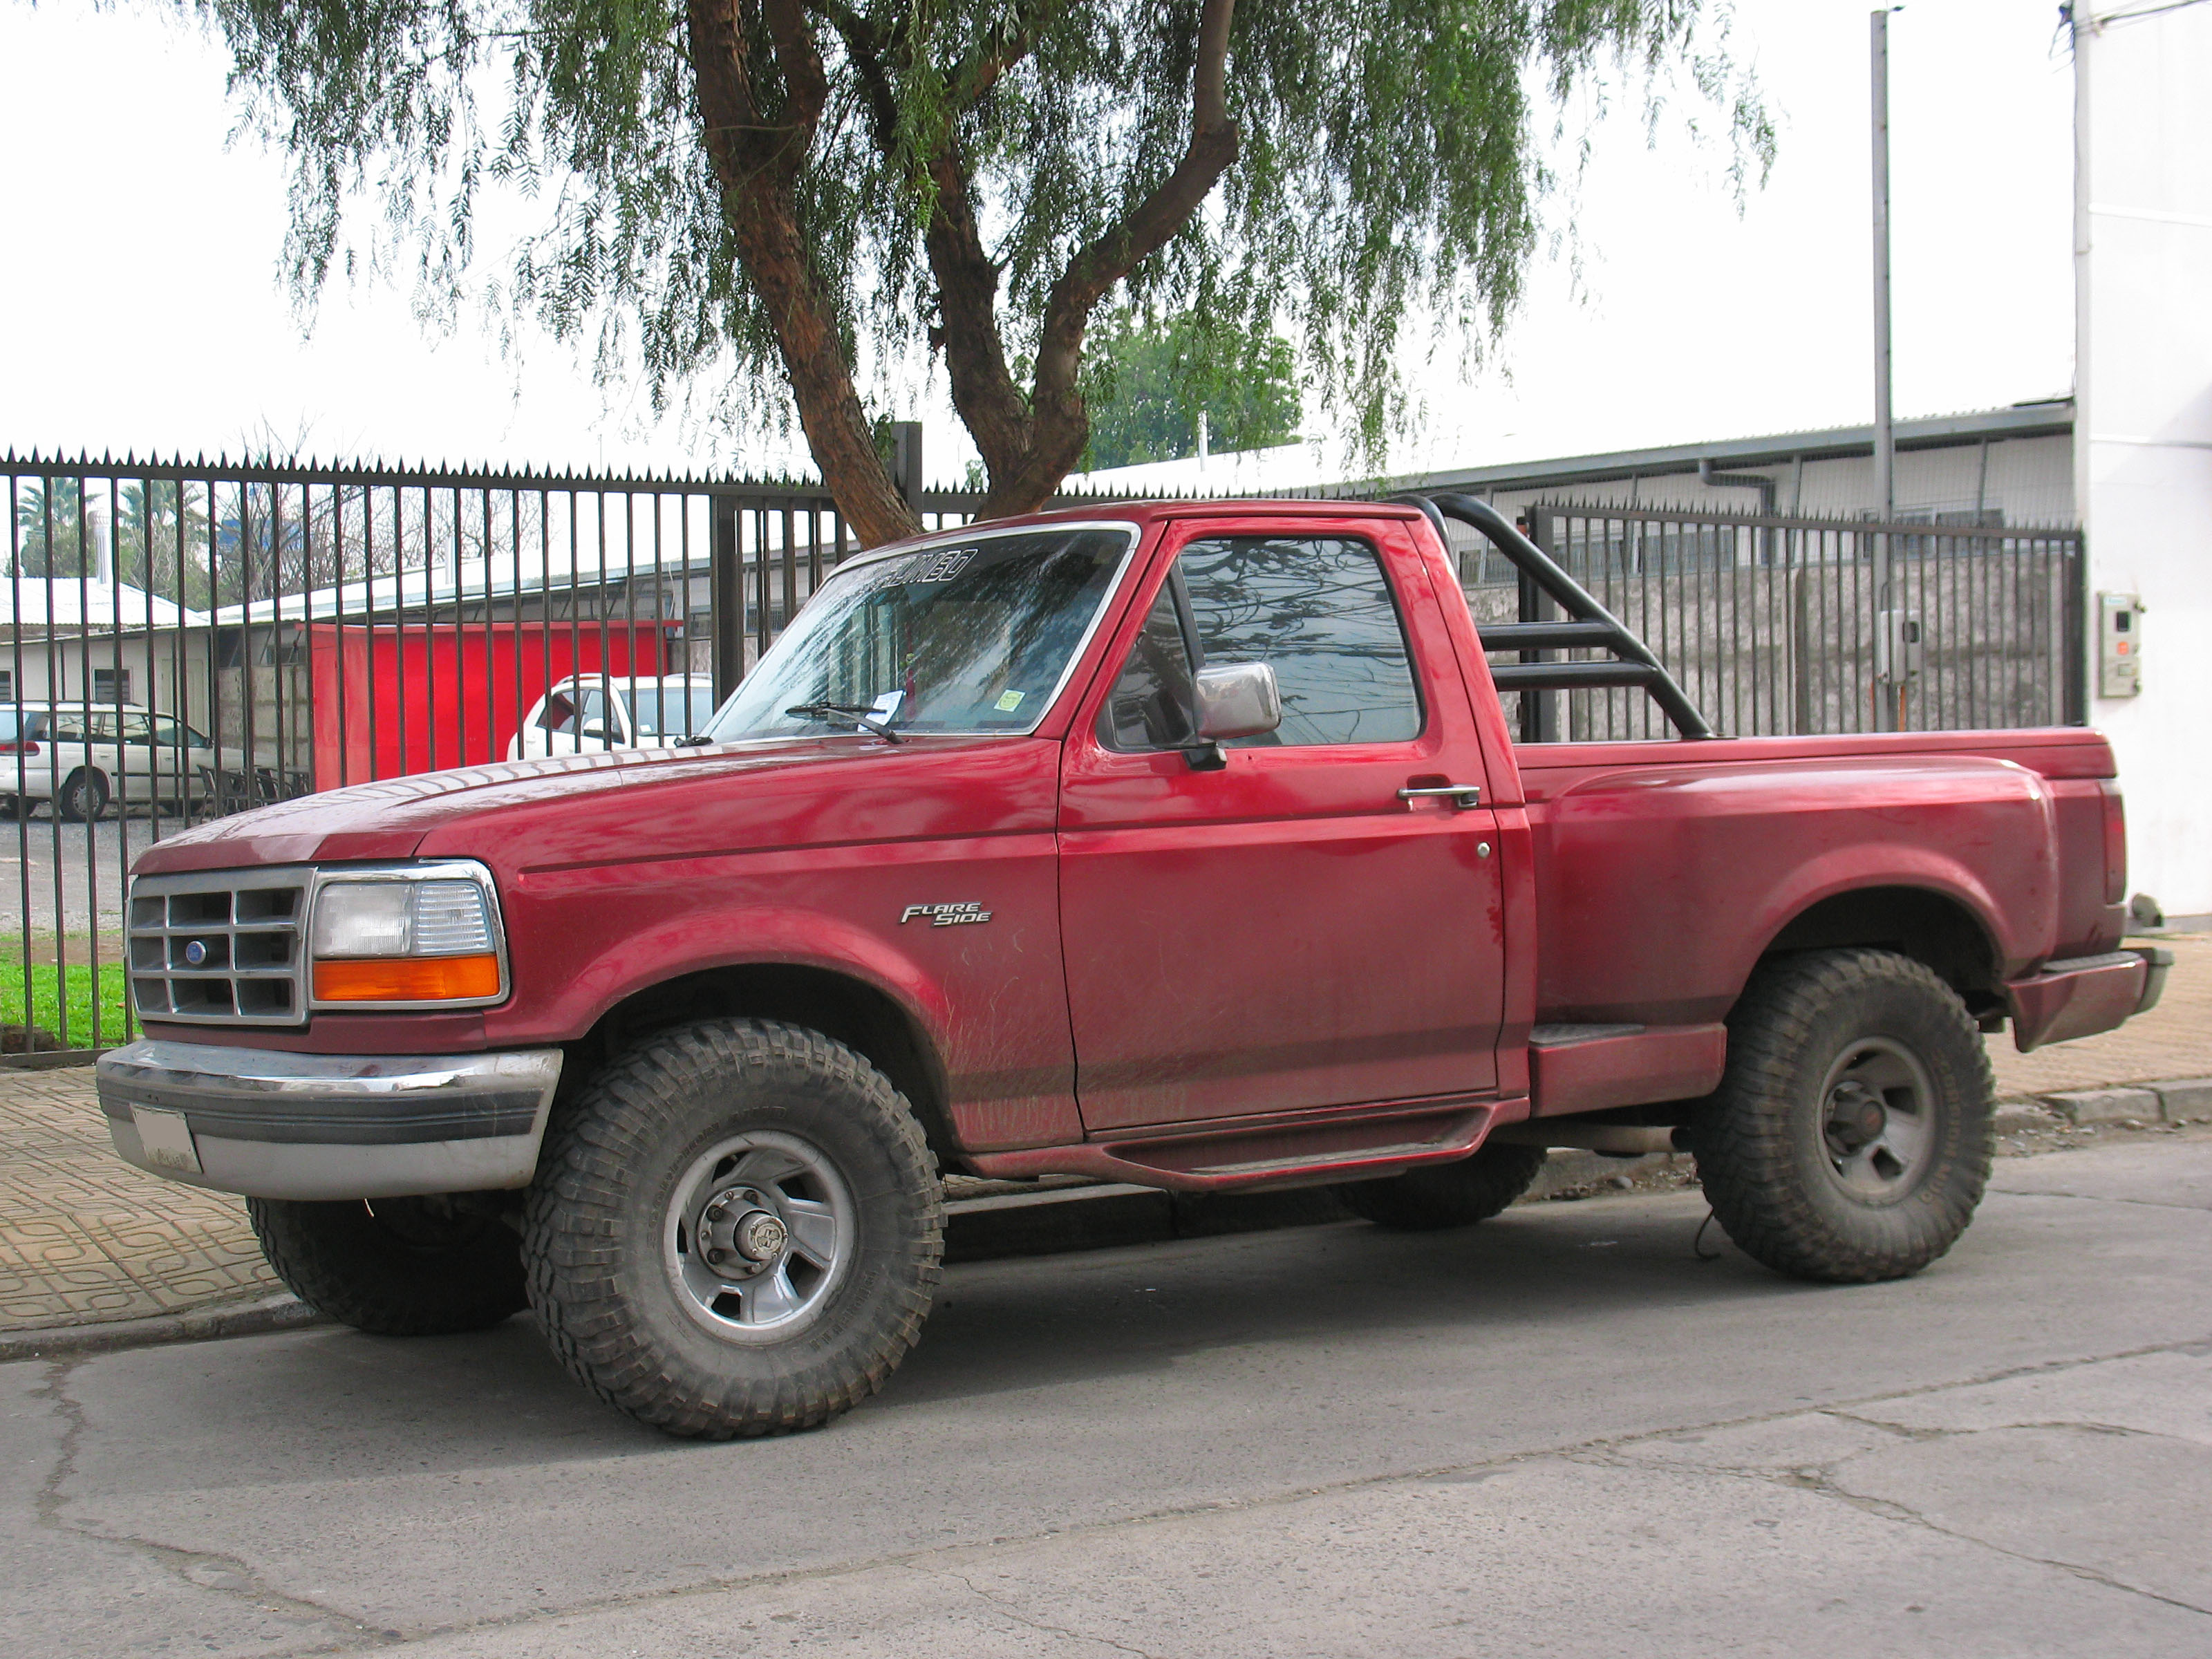 File:Ford F-150 XL Flare Side 4x4 1992 (16247835503).jpg - Wikimedia Commons